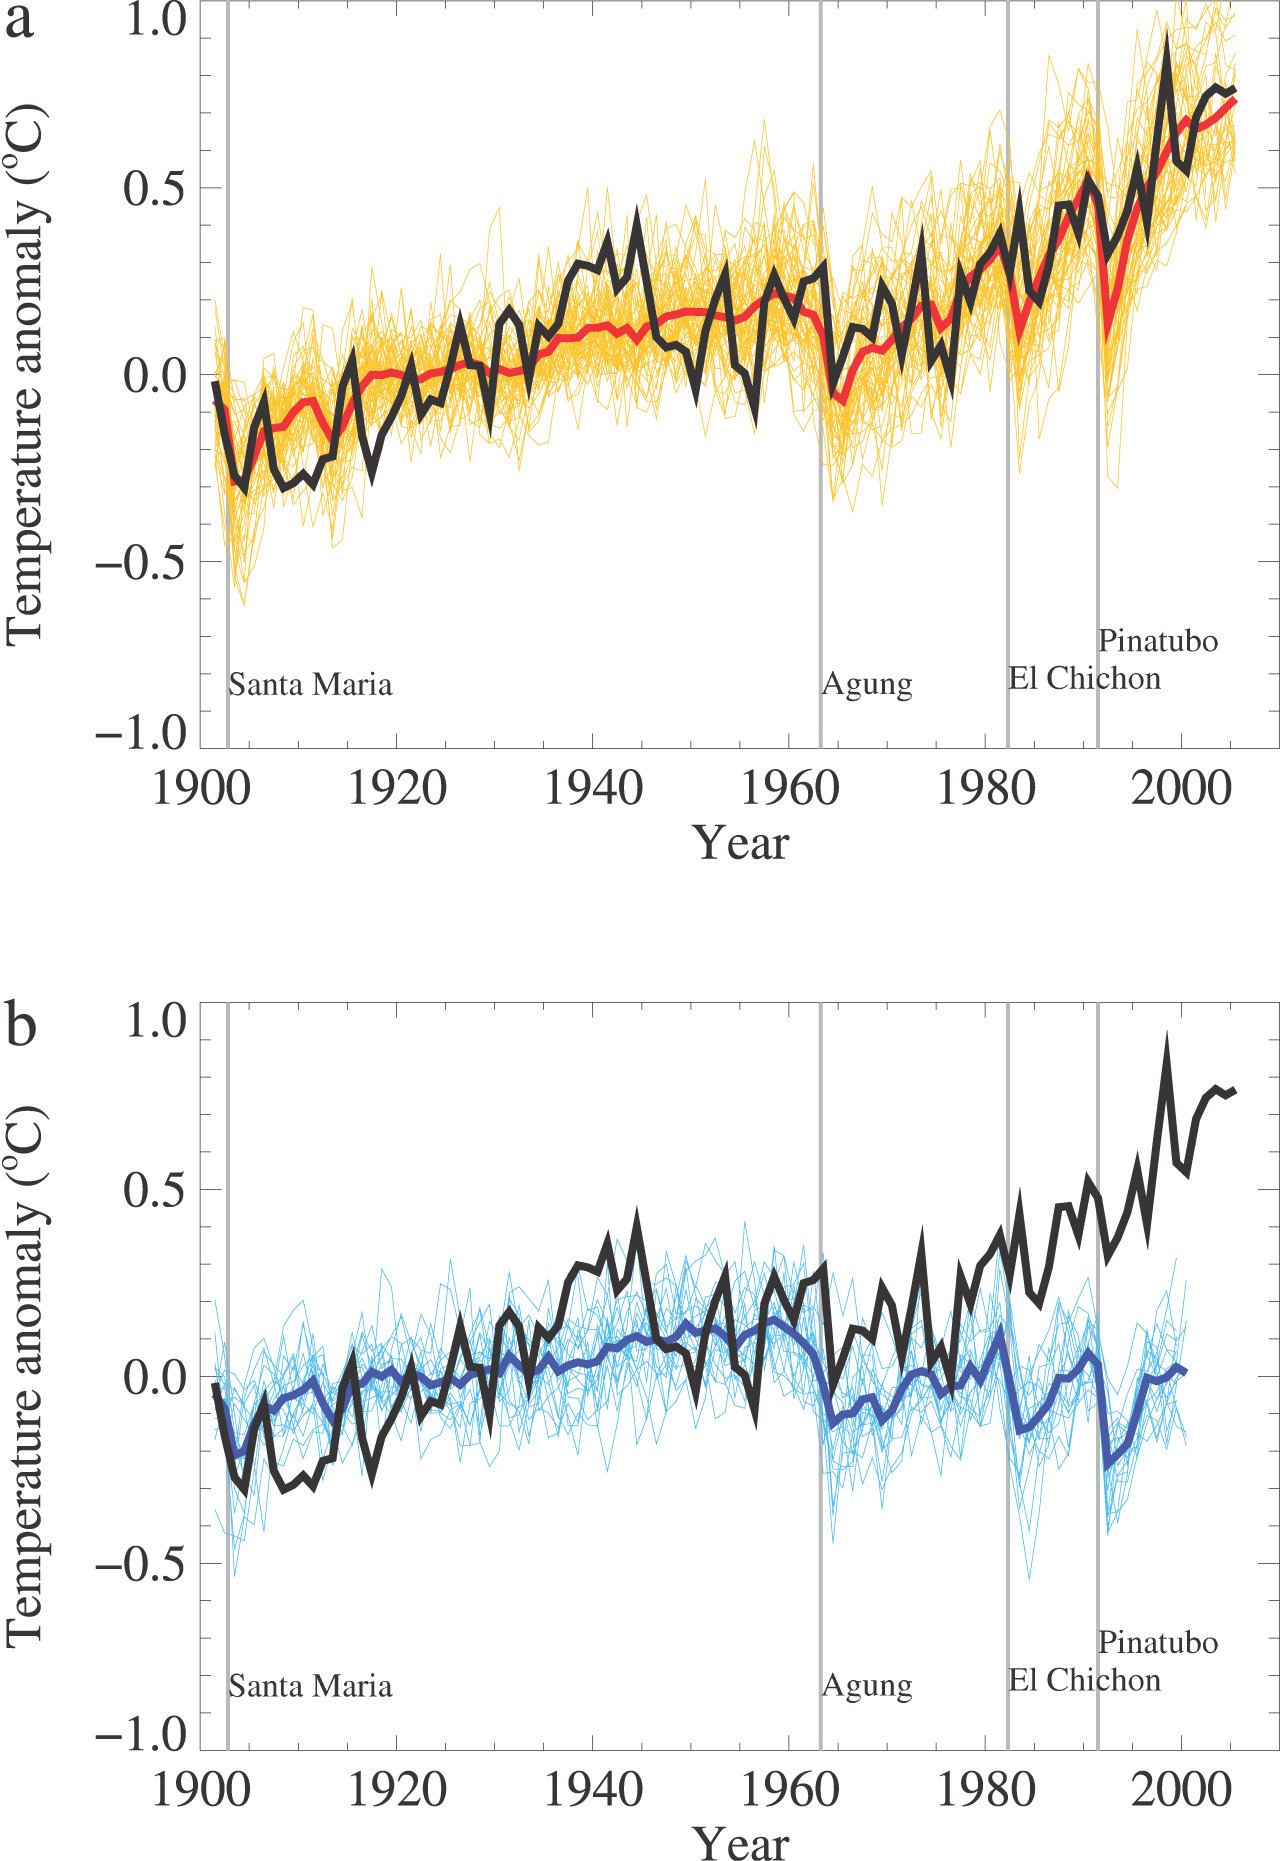 IPCC anthro vs. natural forcings